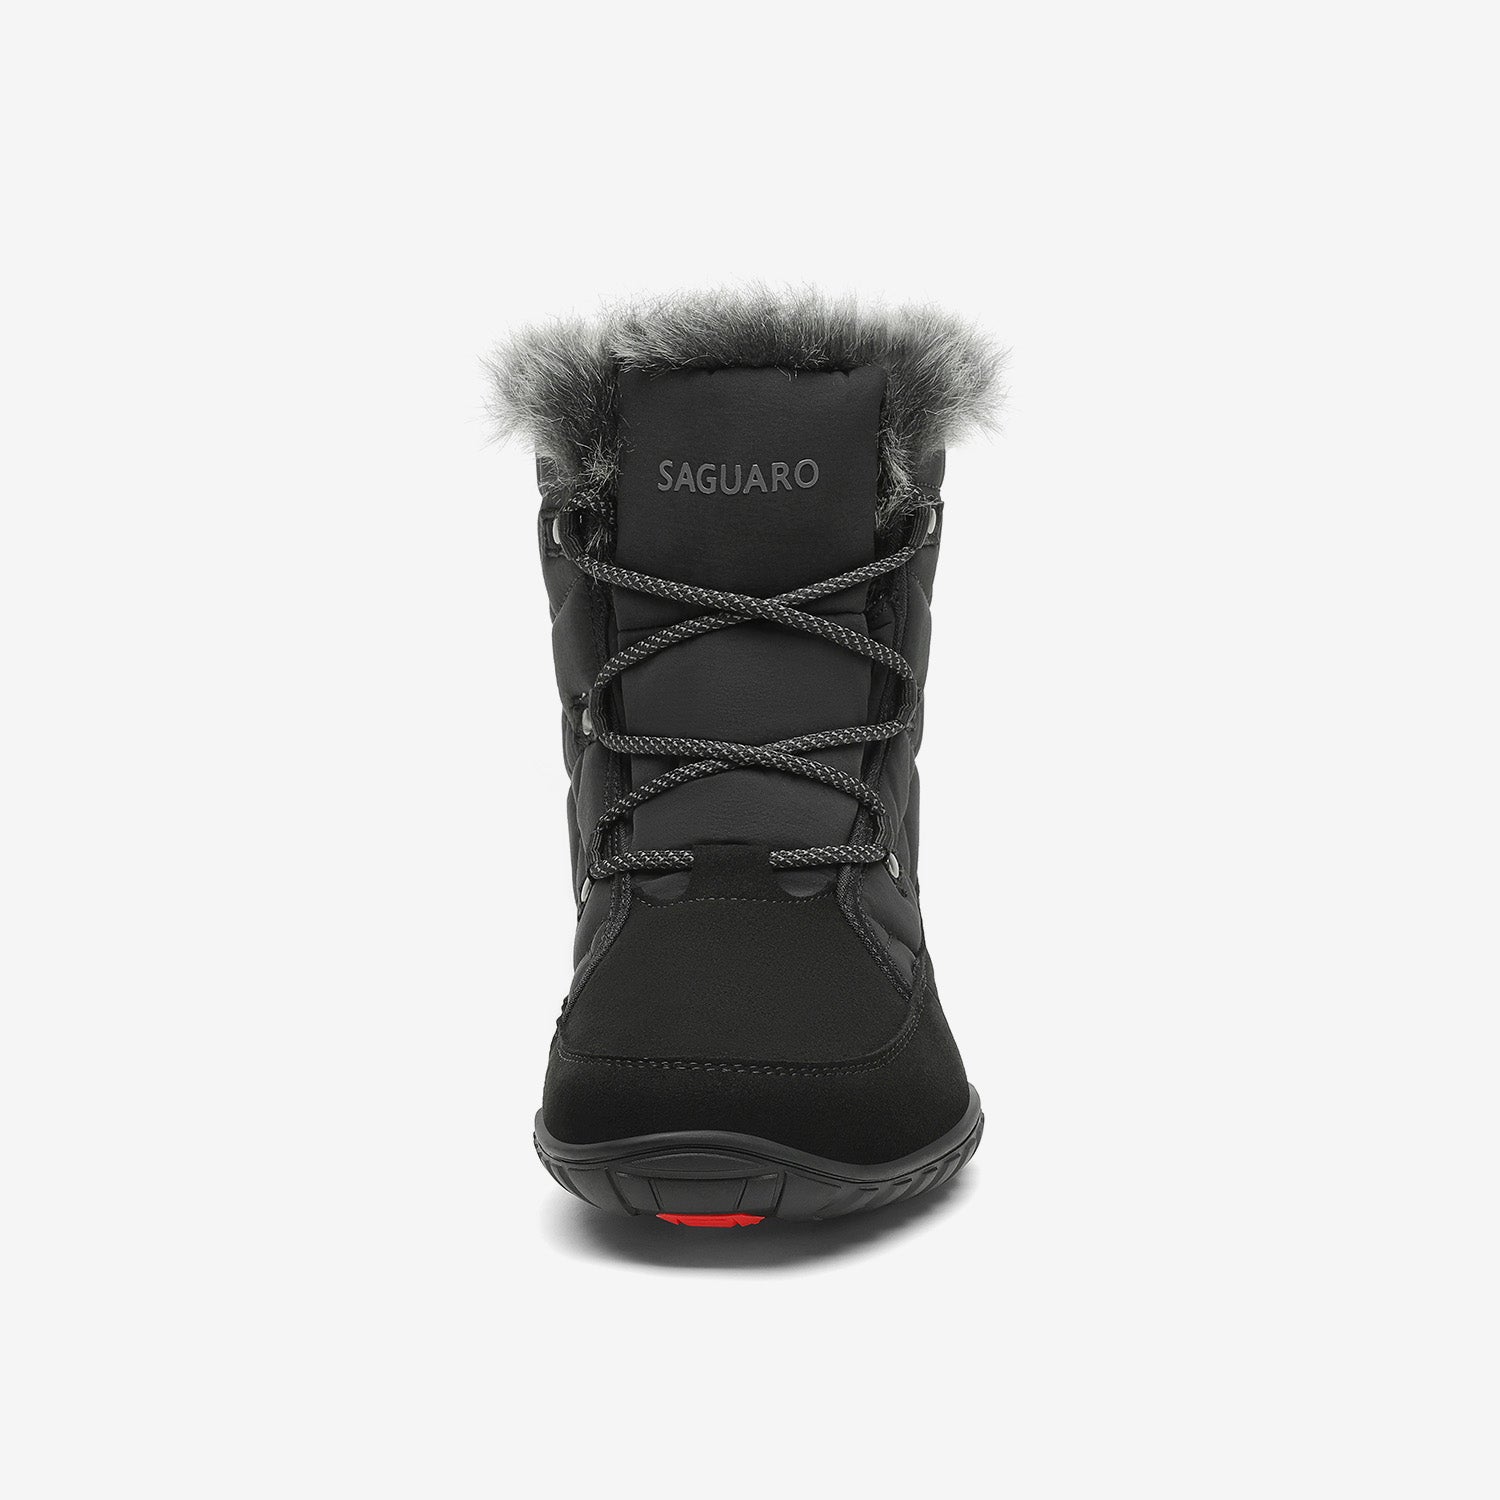 Rise I - Winter Barefoot Boots